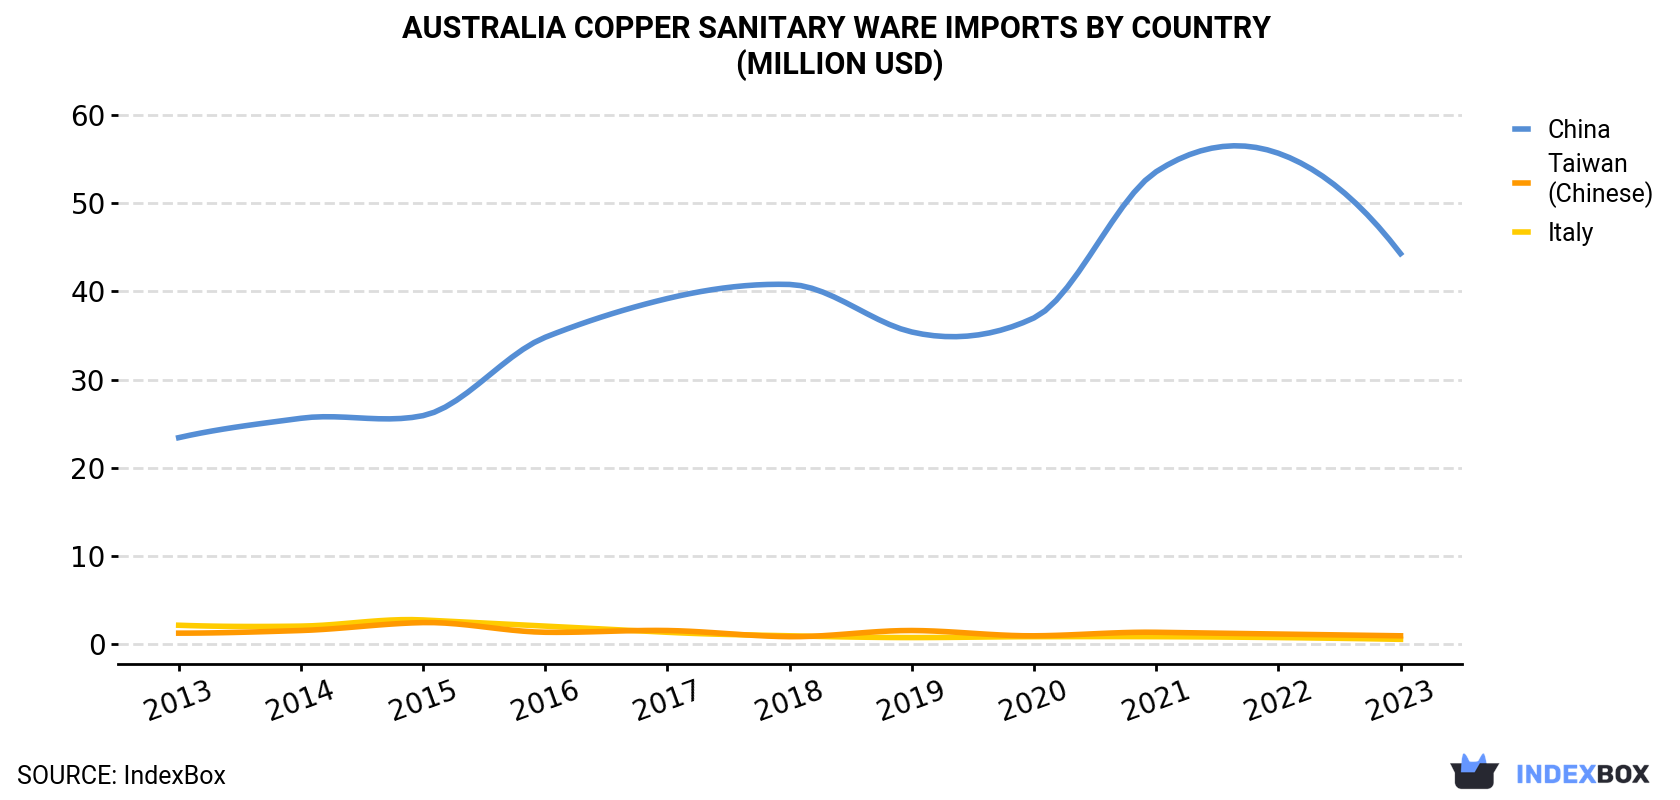 Australia Copper Sanitary Ware Imports By Country (Million USD)